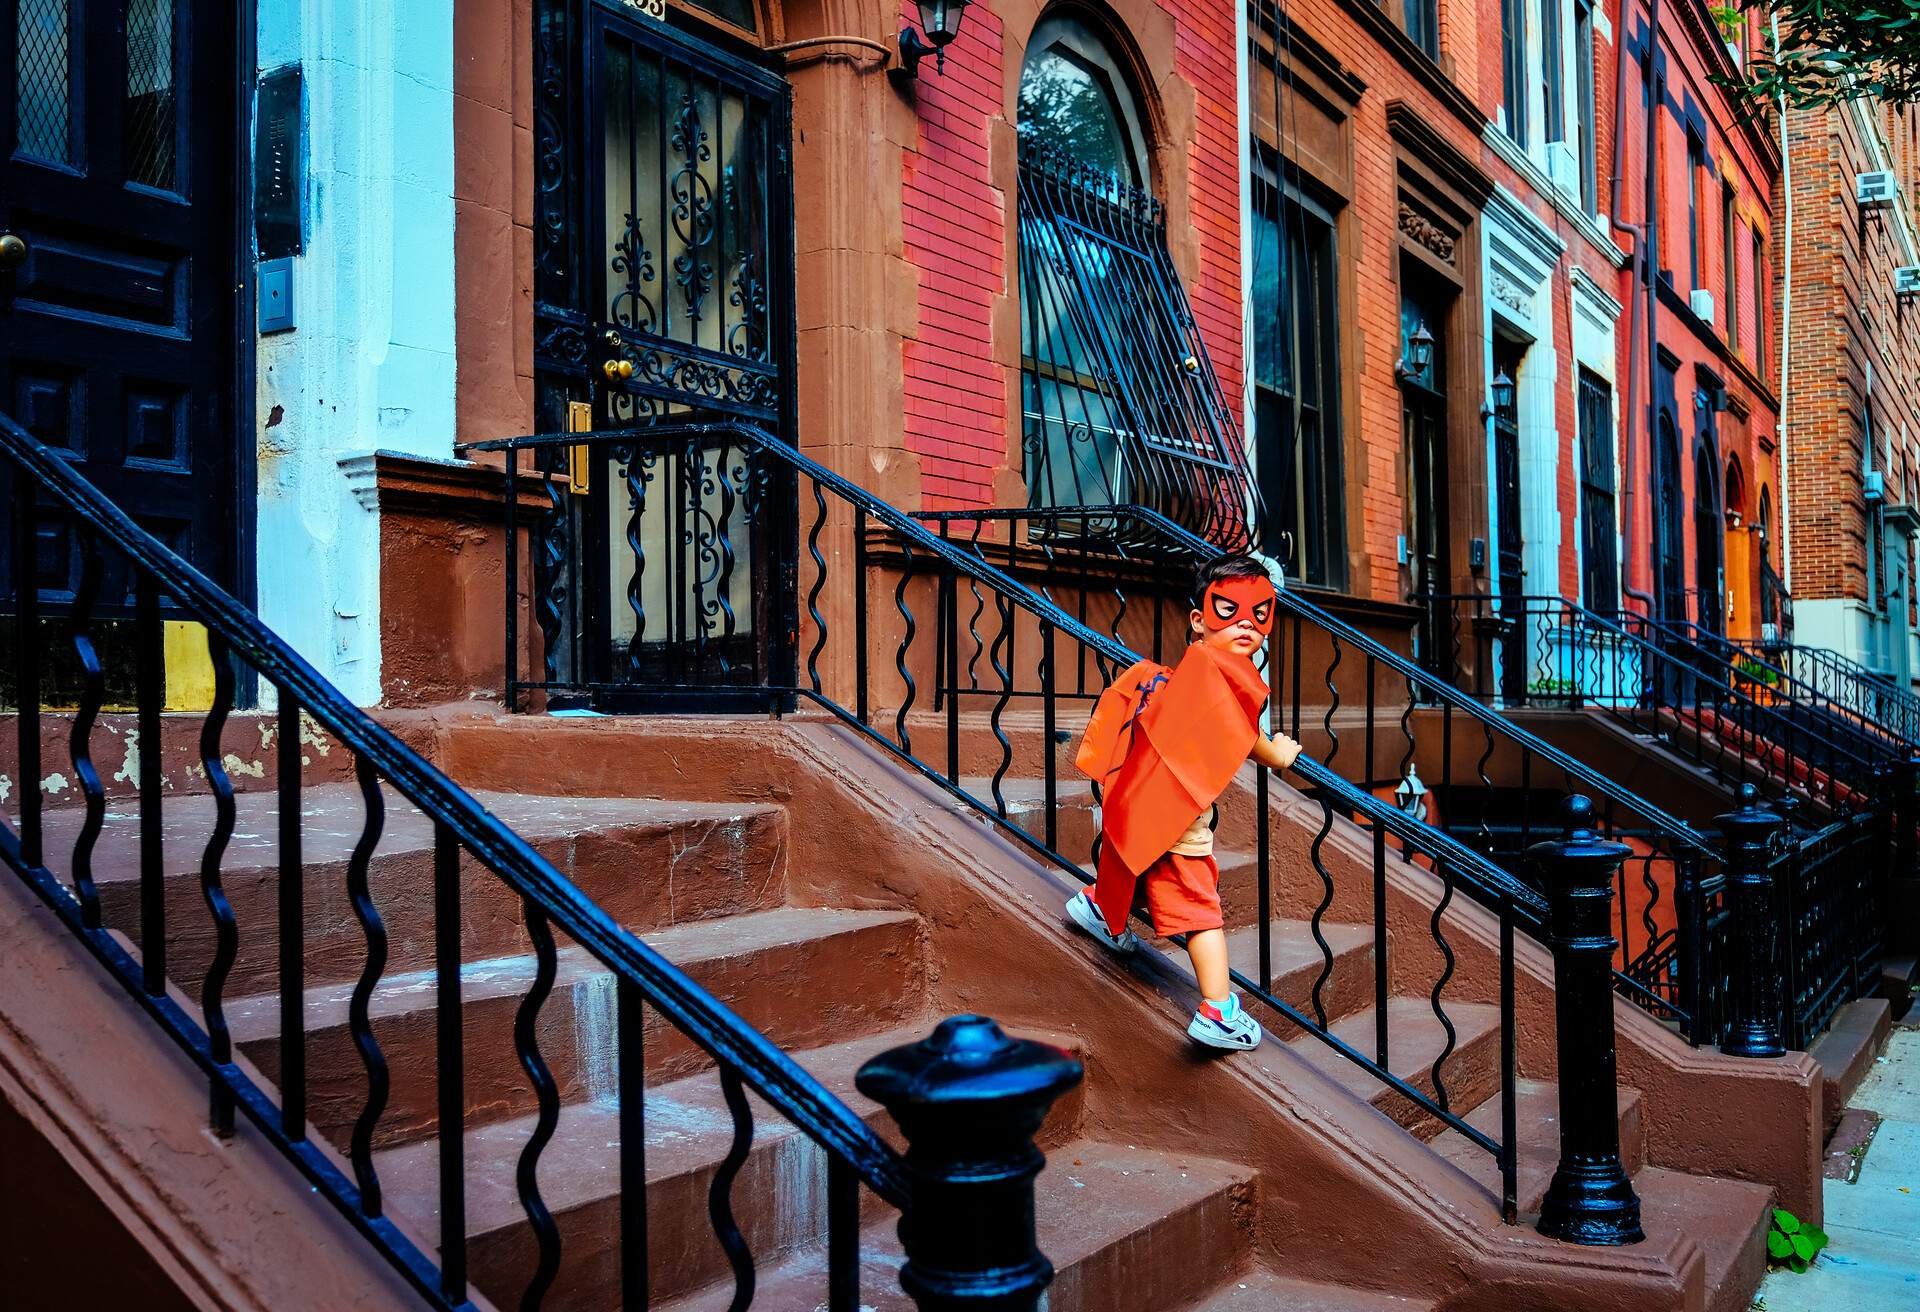 A child dressed as a superhero plays on the stairs of a brownstone building in New York City.